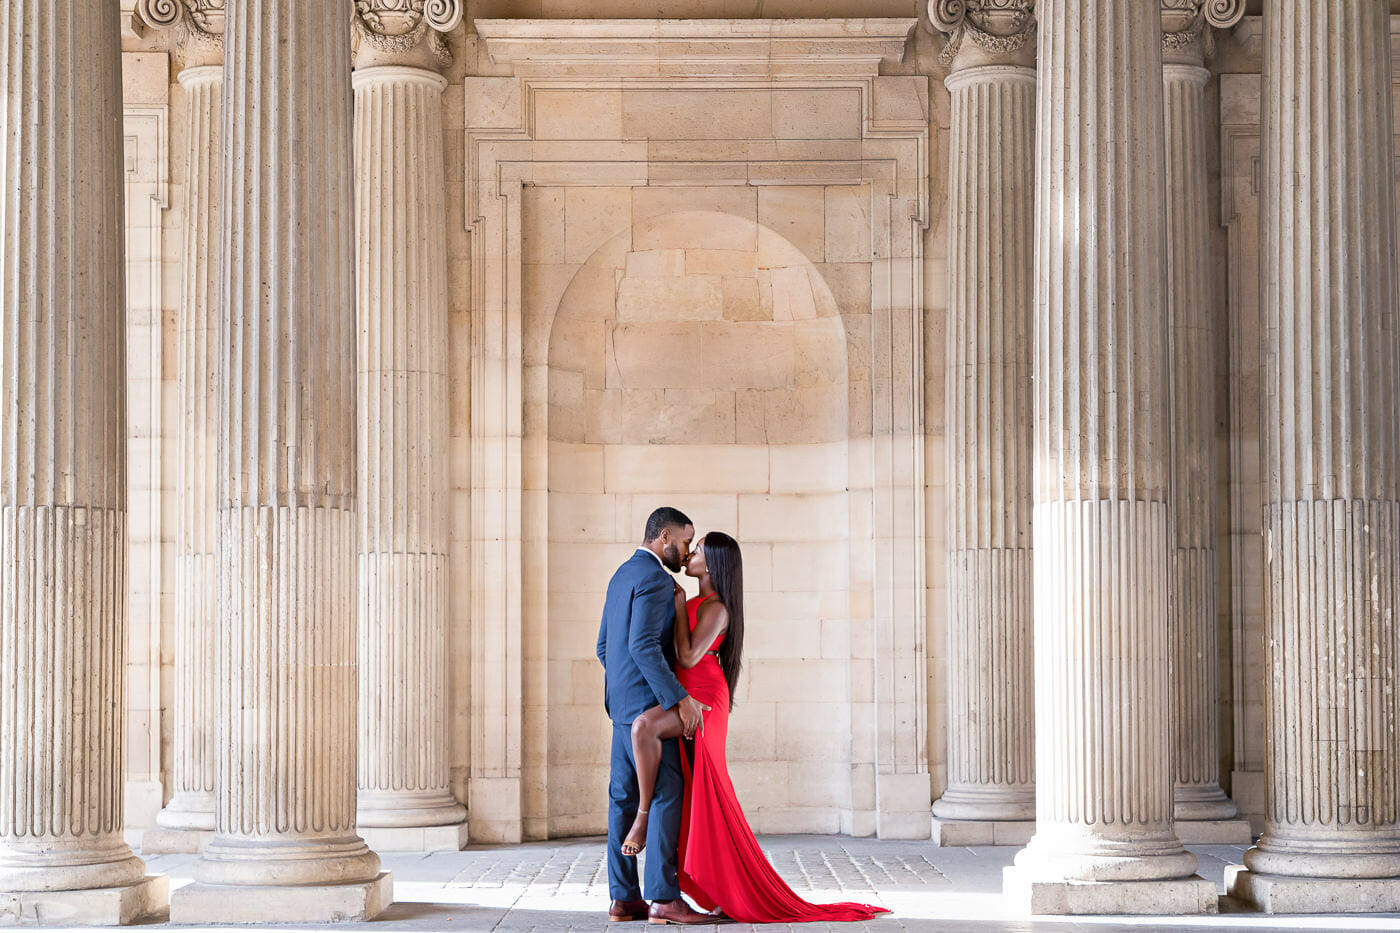 Sexy couple photoshoot at the Louvre Museum during sunrise